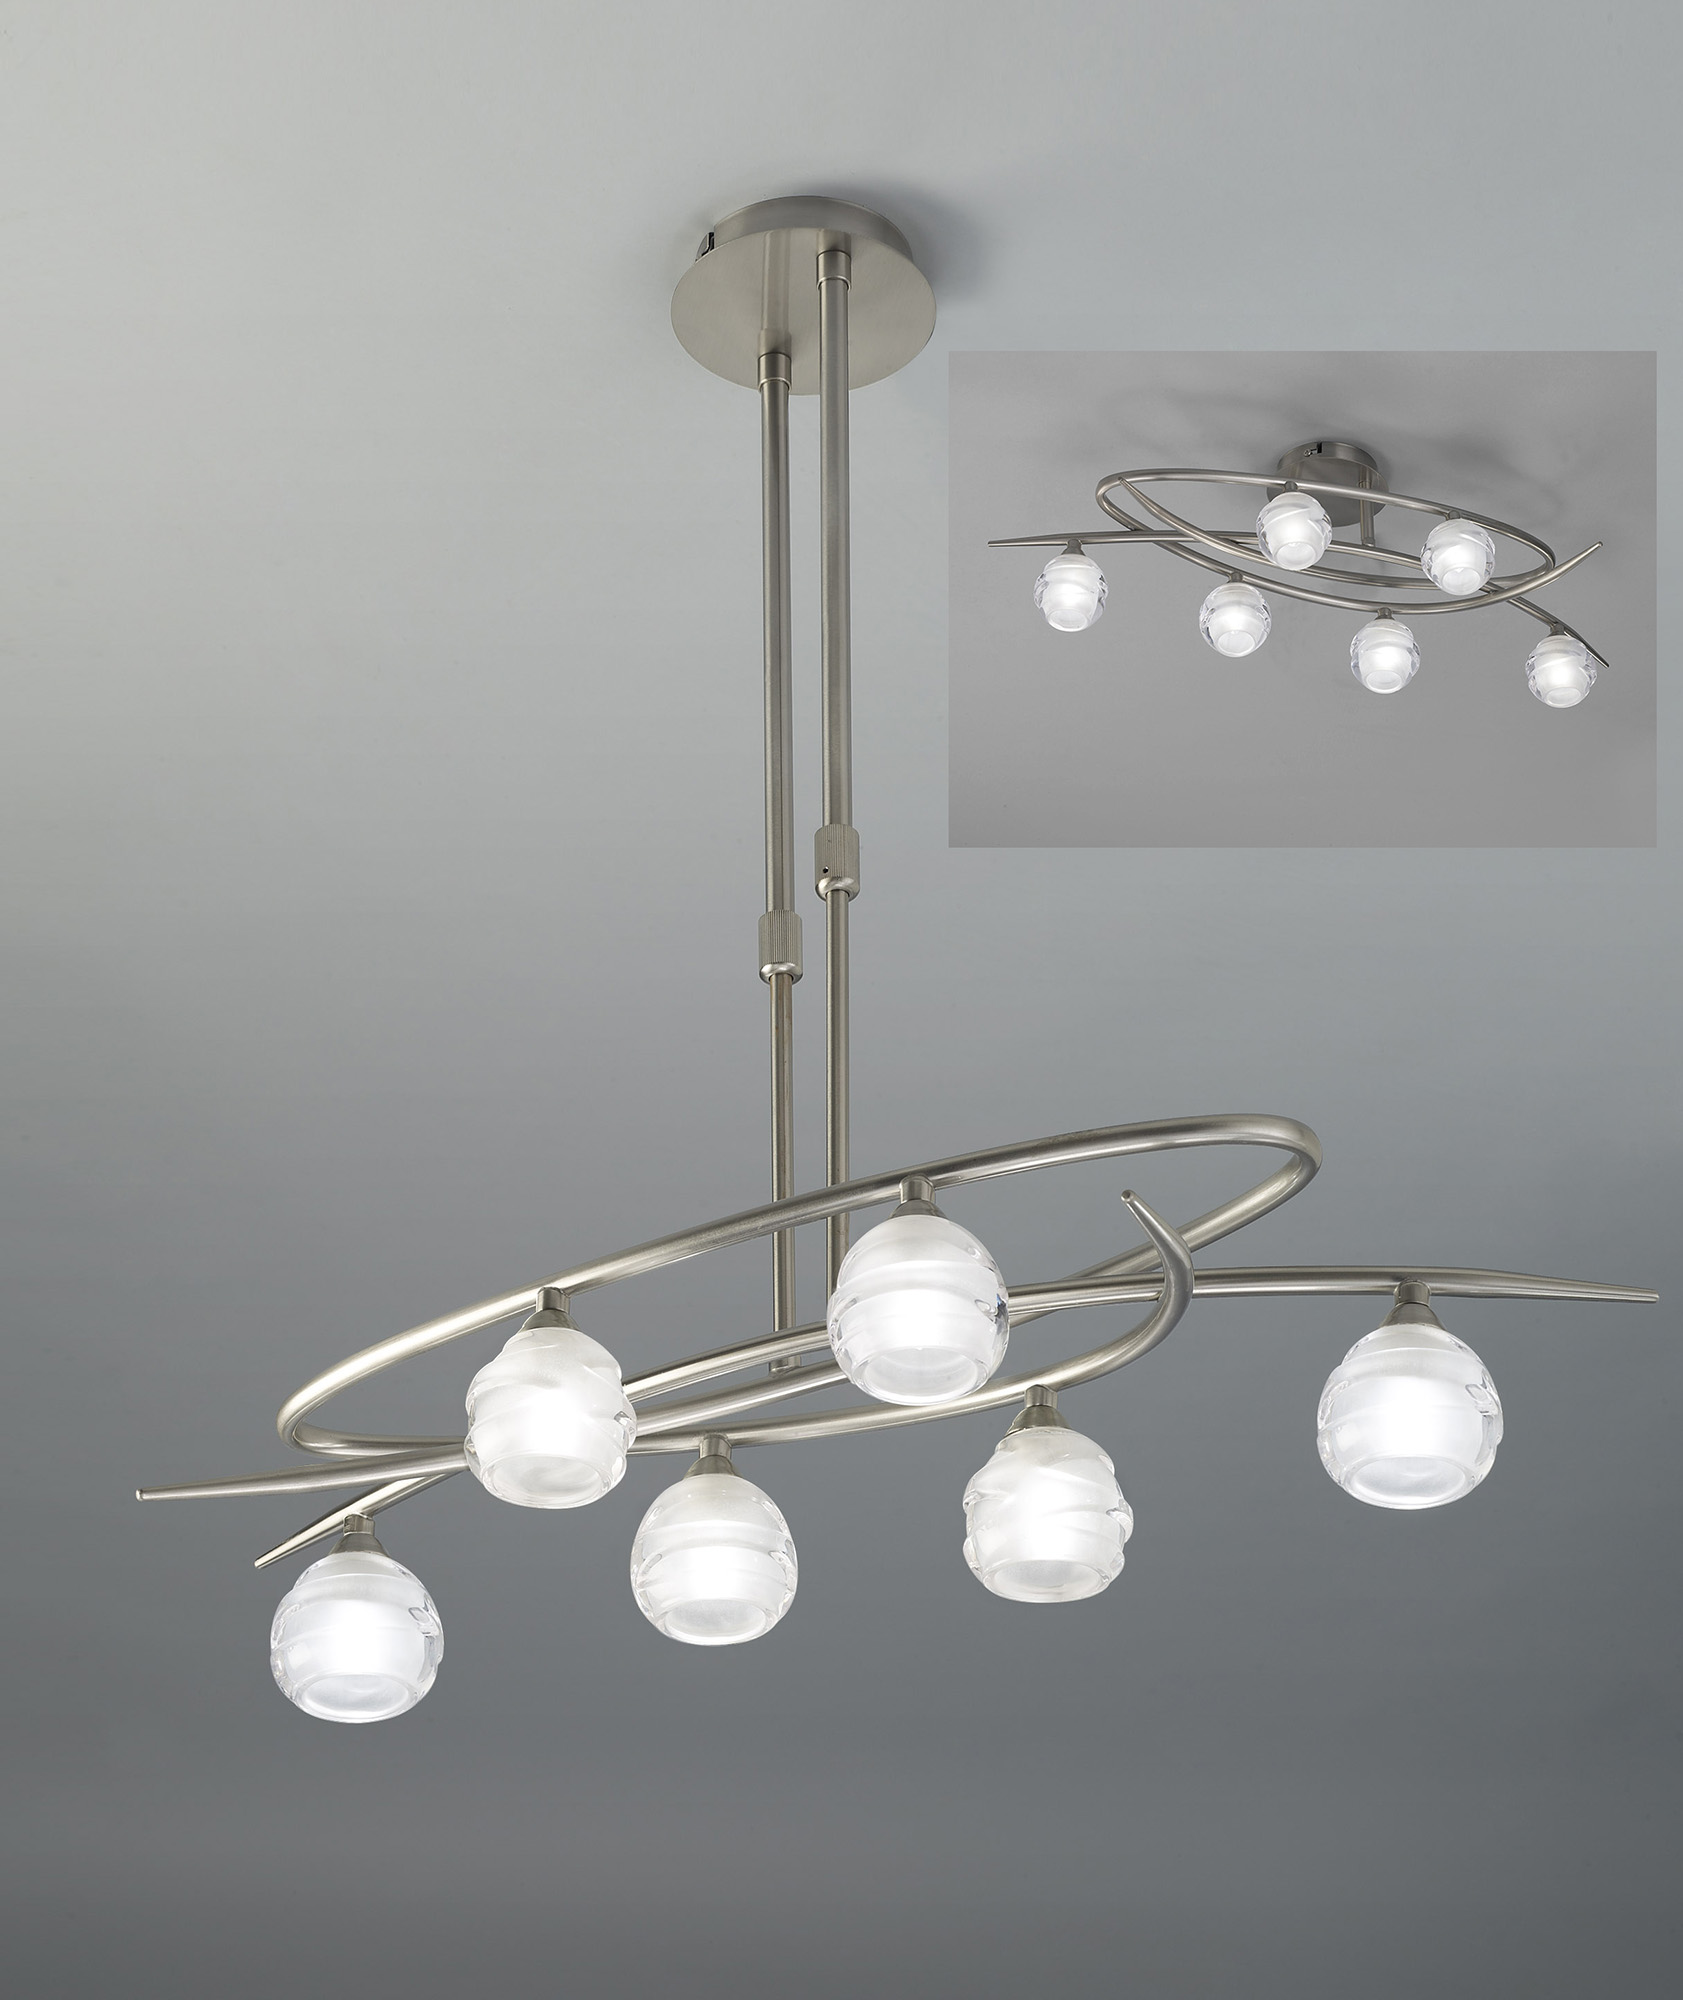 Loop SN Ceiling Lights Mantra Contemporary Ceiling Lights